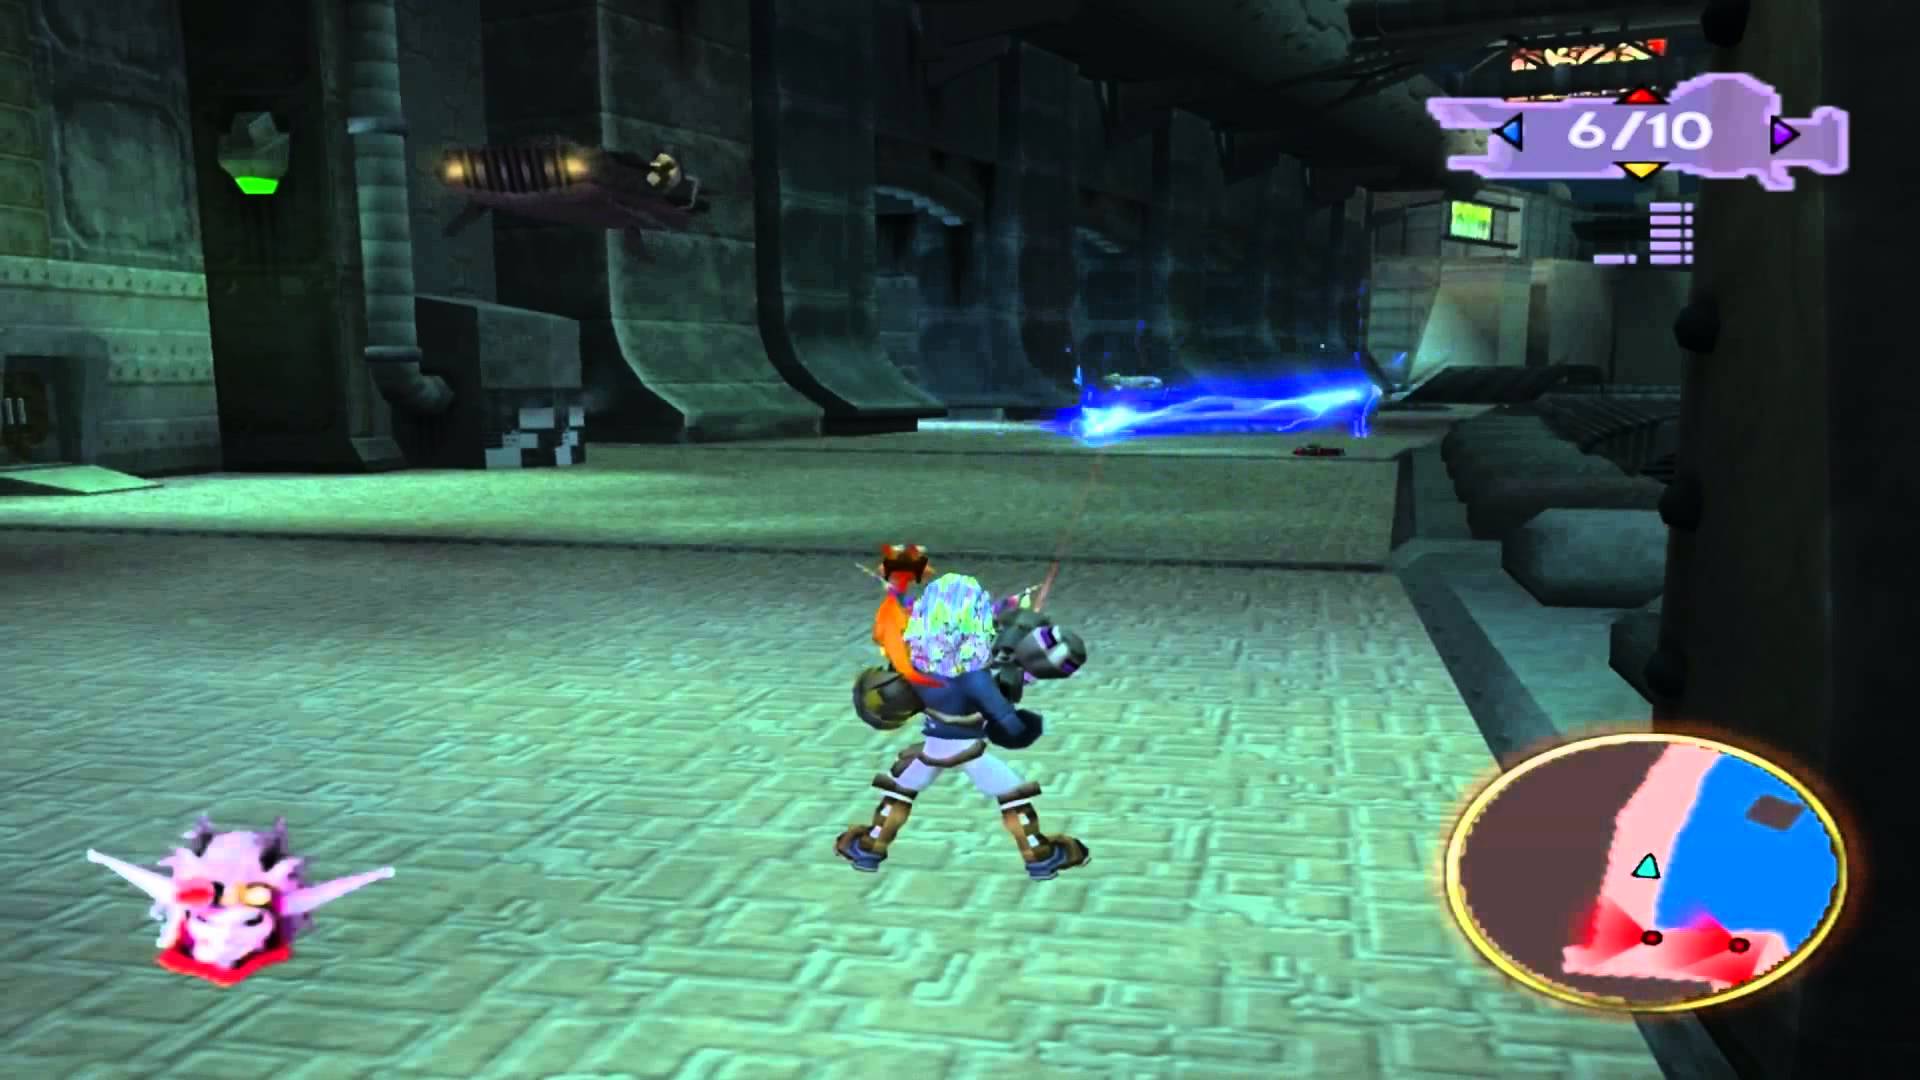 demo dise with jak 3 ps2